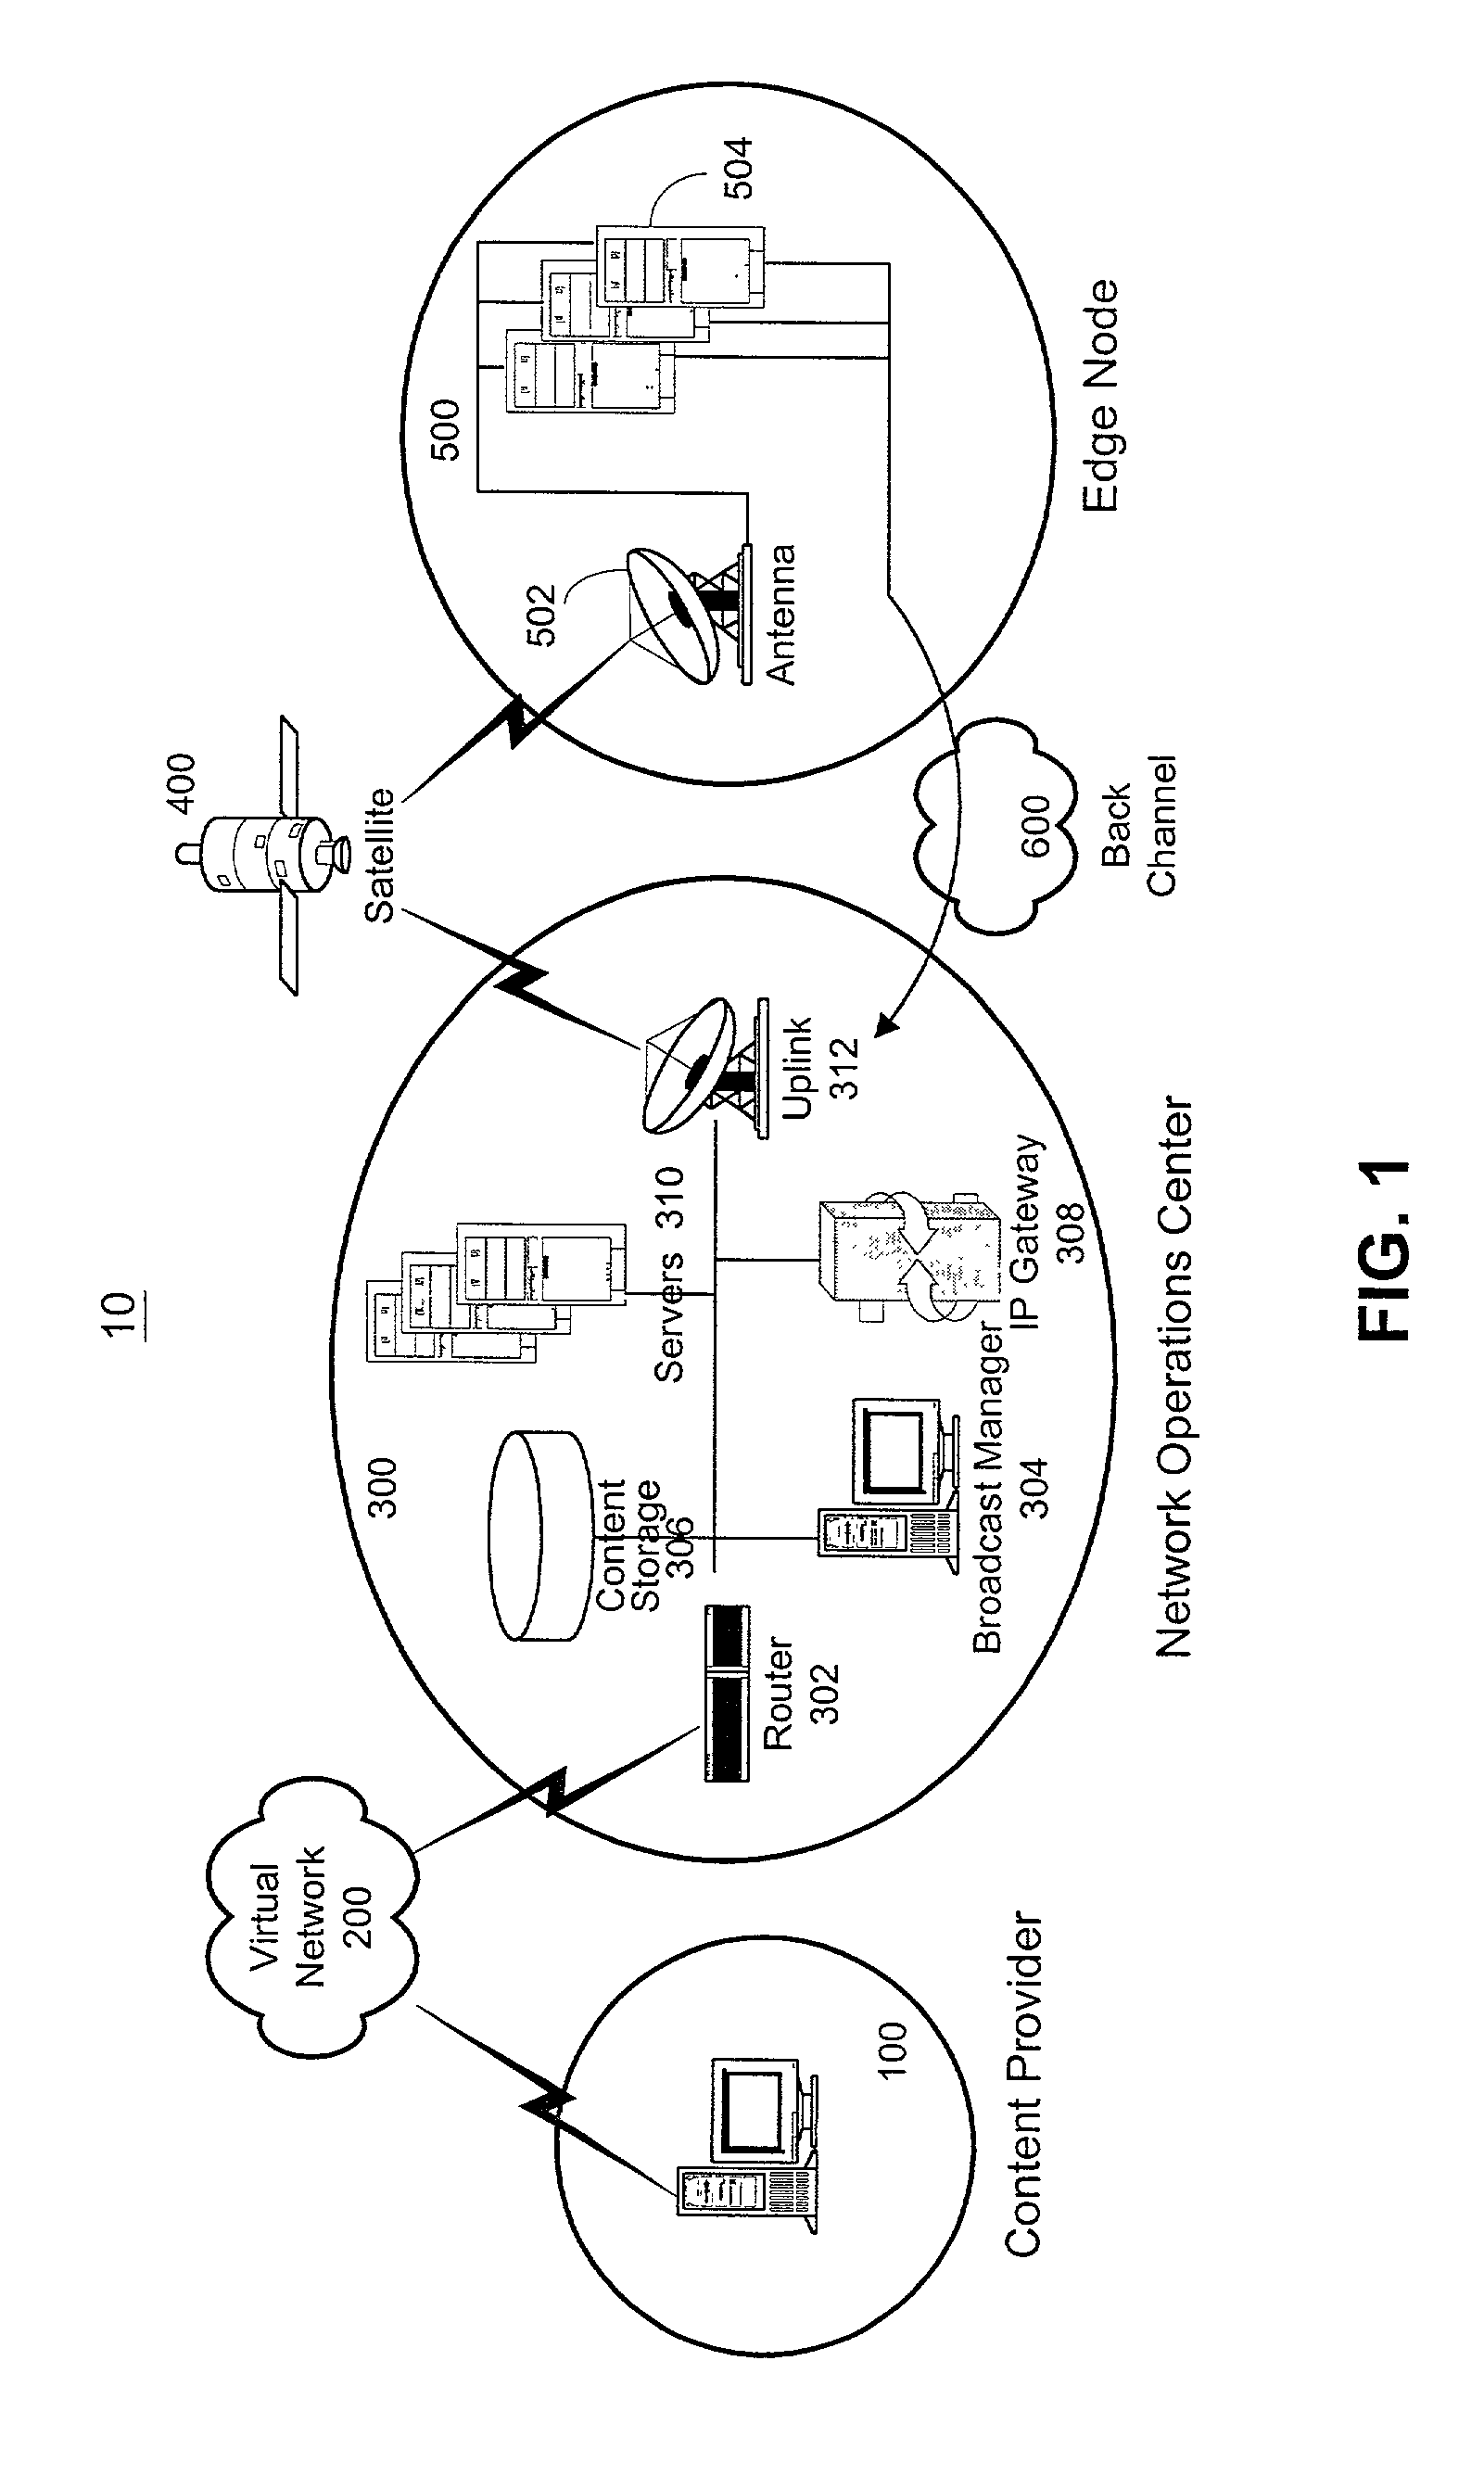 Forward cache management between edge nodes in a satellite based content delivery system